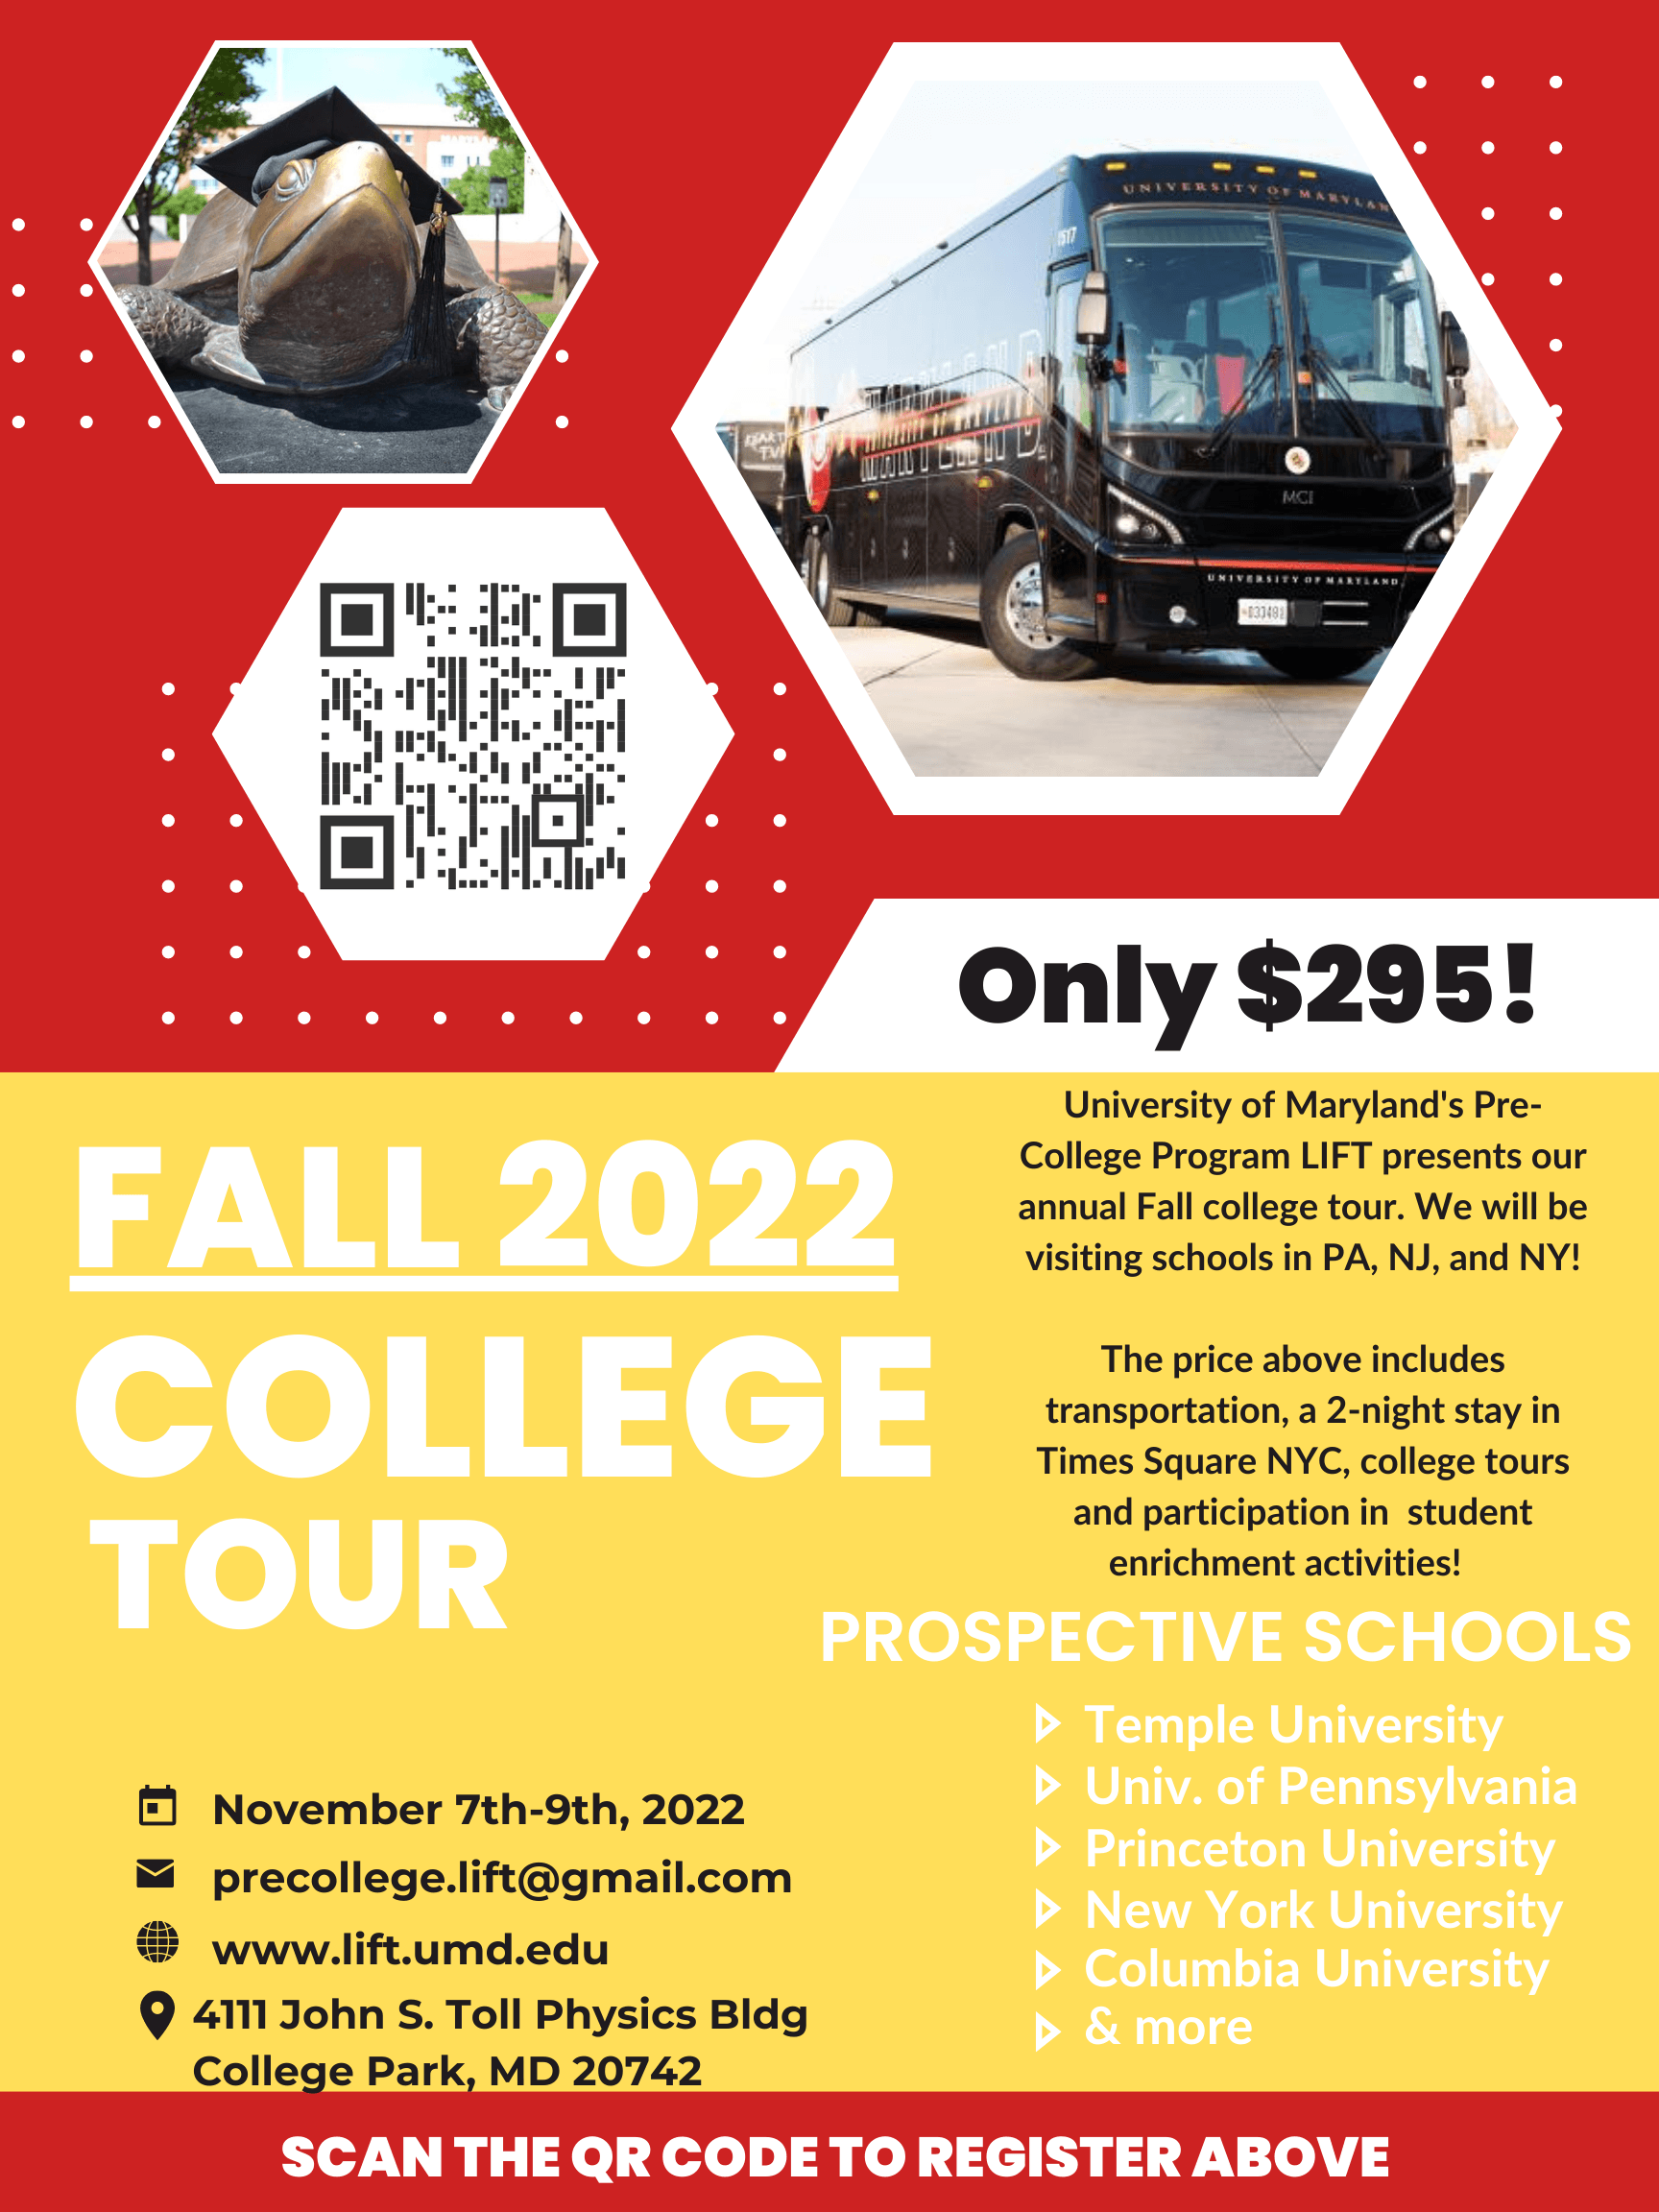 Fall 2022 LIFT College Tour Flyer 